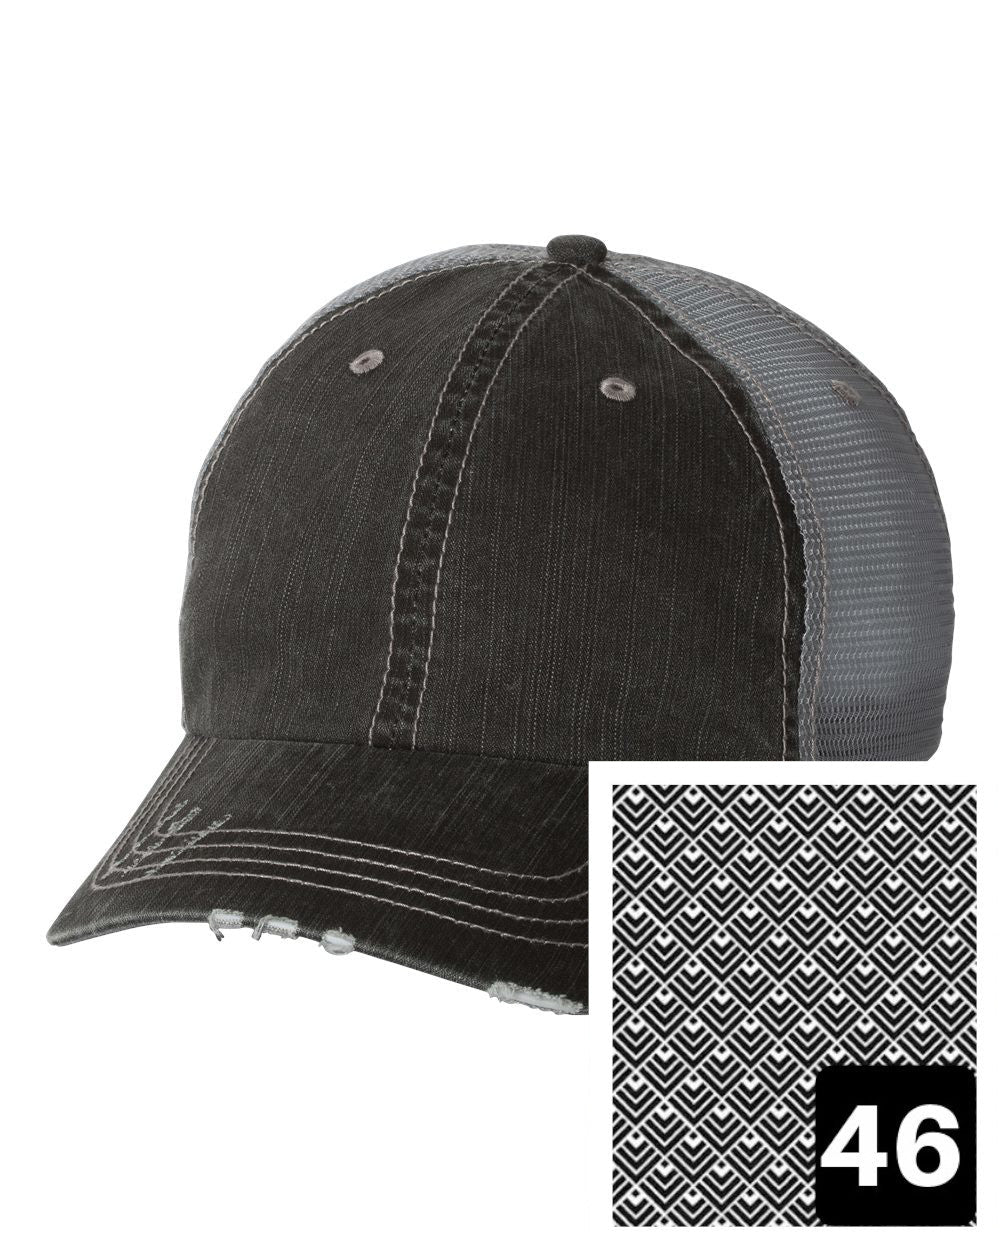 gray distressed trucker hat with pink star graphic fabric state of Maine